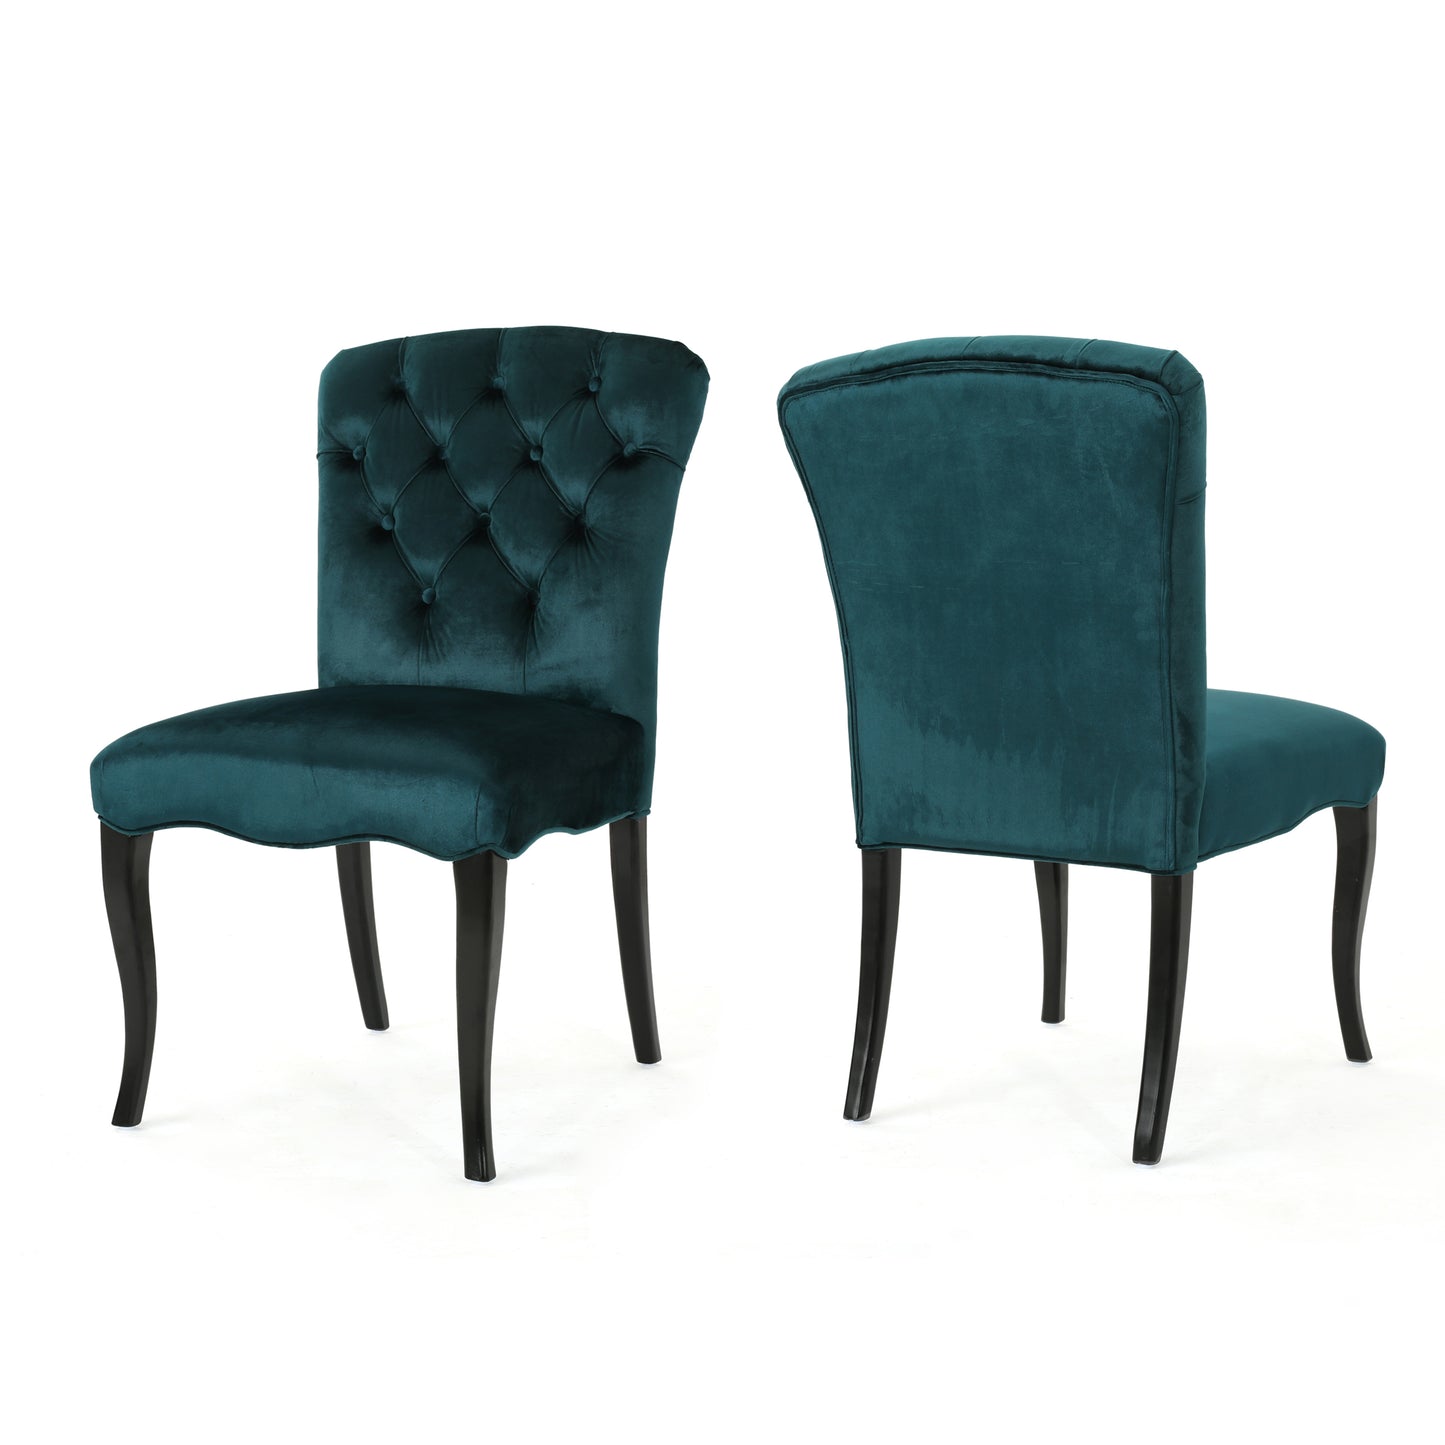 Hallie Traditional Tufted Armless Dining Chairs (Set of 2)